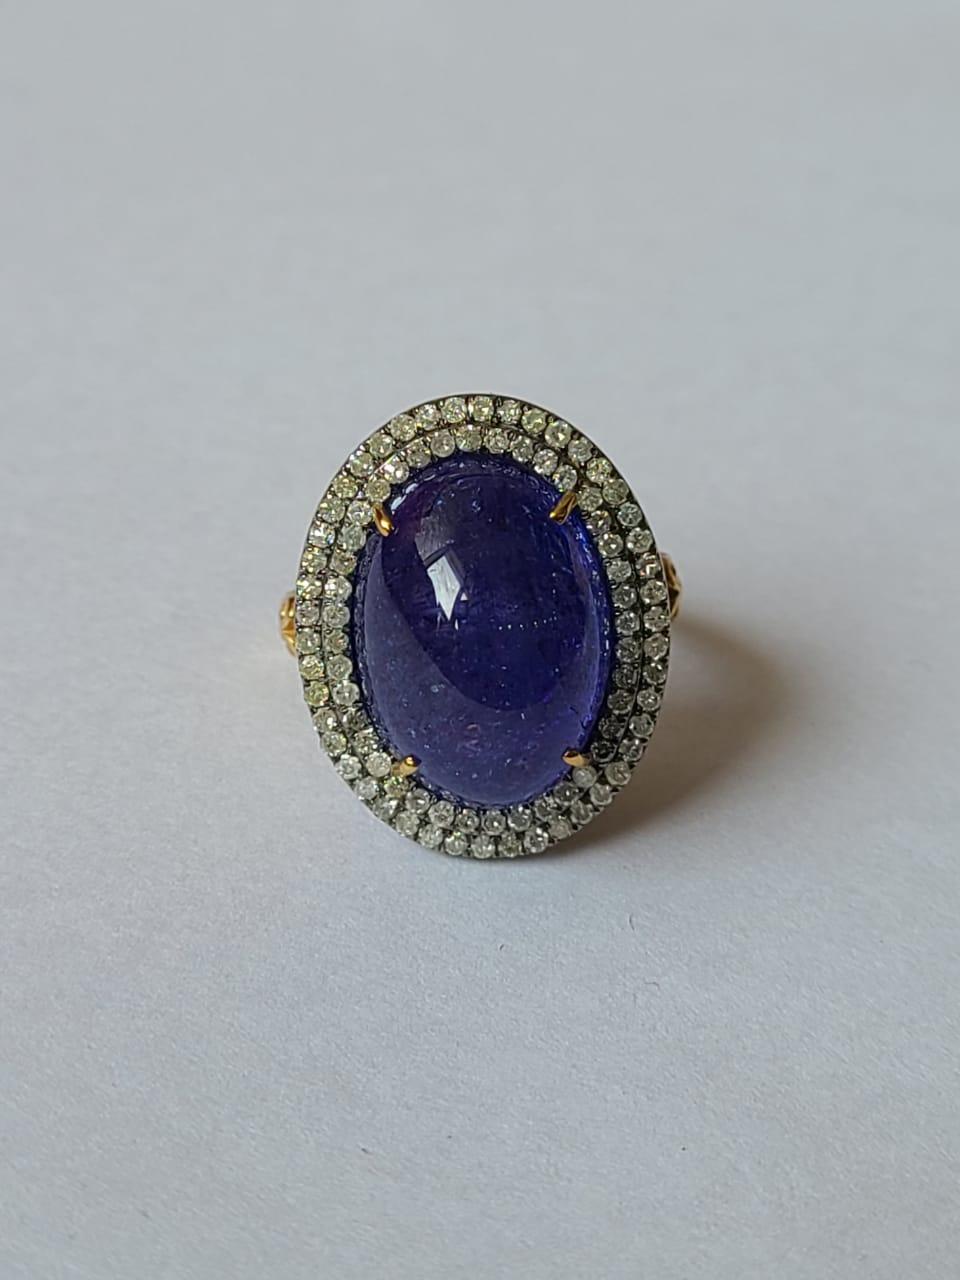 A very gorgeous and one of a kind, Tanzanite Art Deco Style Victorian Cocktail / Dome Ring set in 14K Gold, 925 Silver & Diamonds. The weight of the Tanzanite Cabochon is 13.06 carats. The Tanzanite is responsibly sourced from Tanzania. The weight